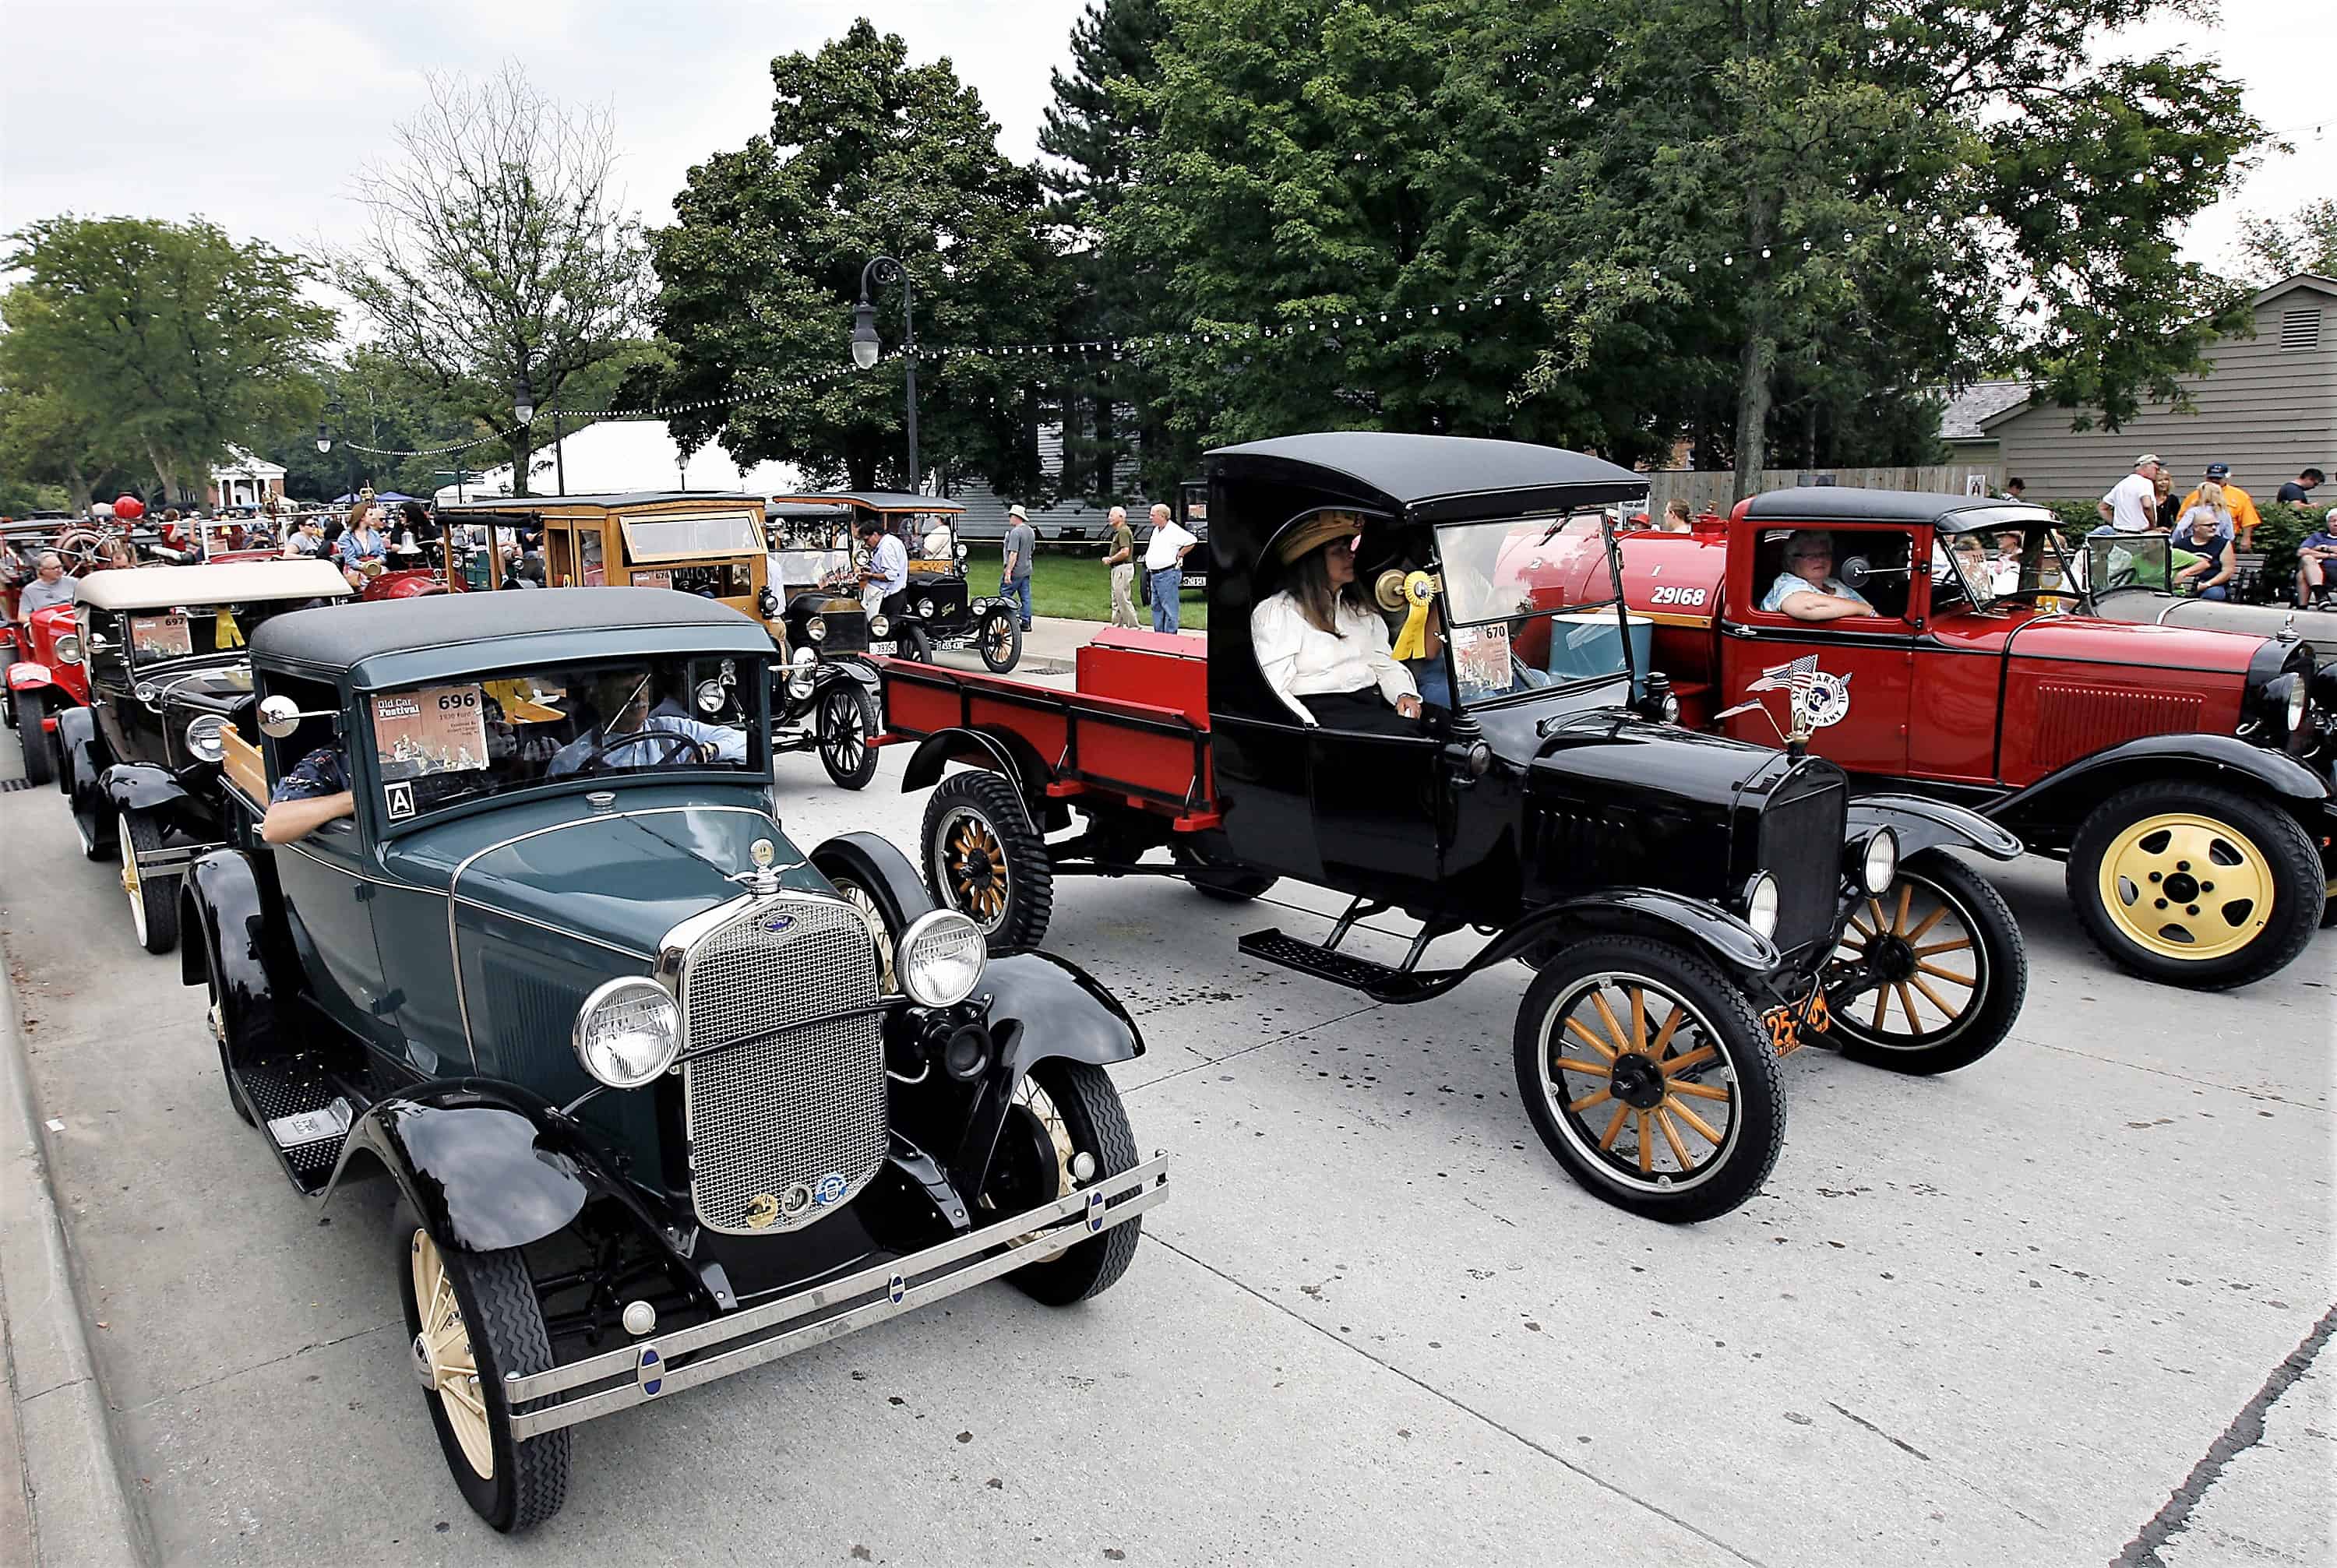 Old Car Festival, splendor in France, and new events